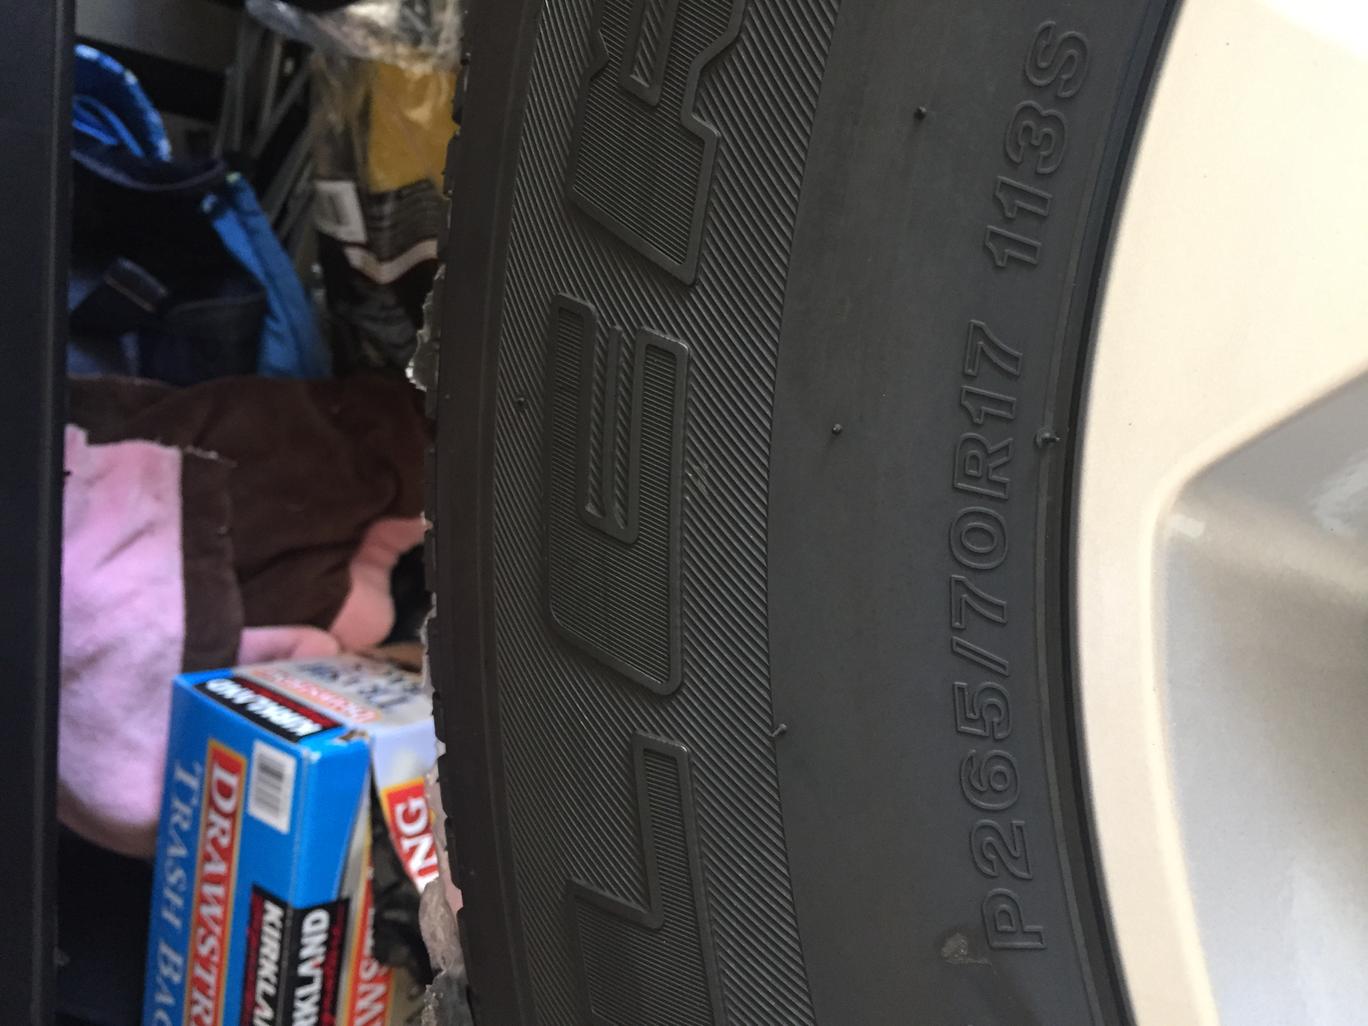 WTS 2015 SR5 Rims and tires asking 0.00-2015-8-16-11-08-13-jpg